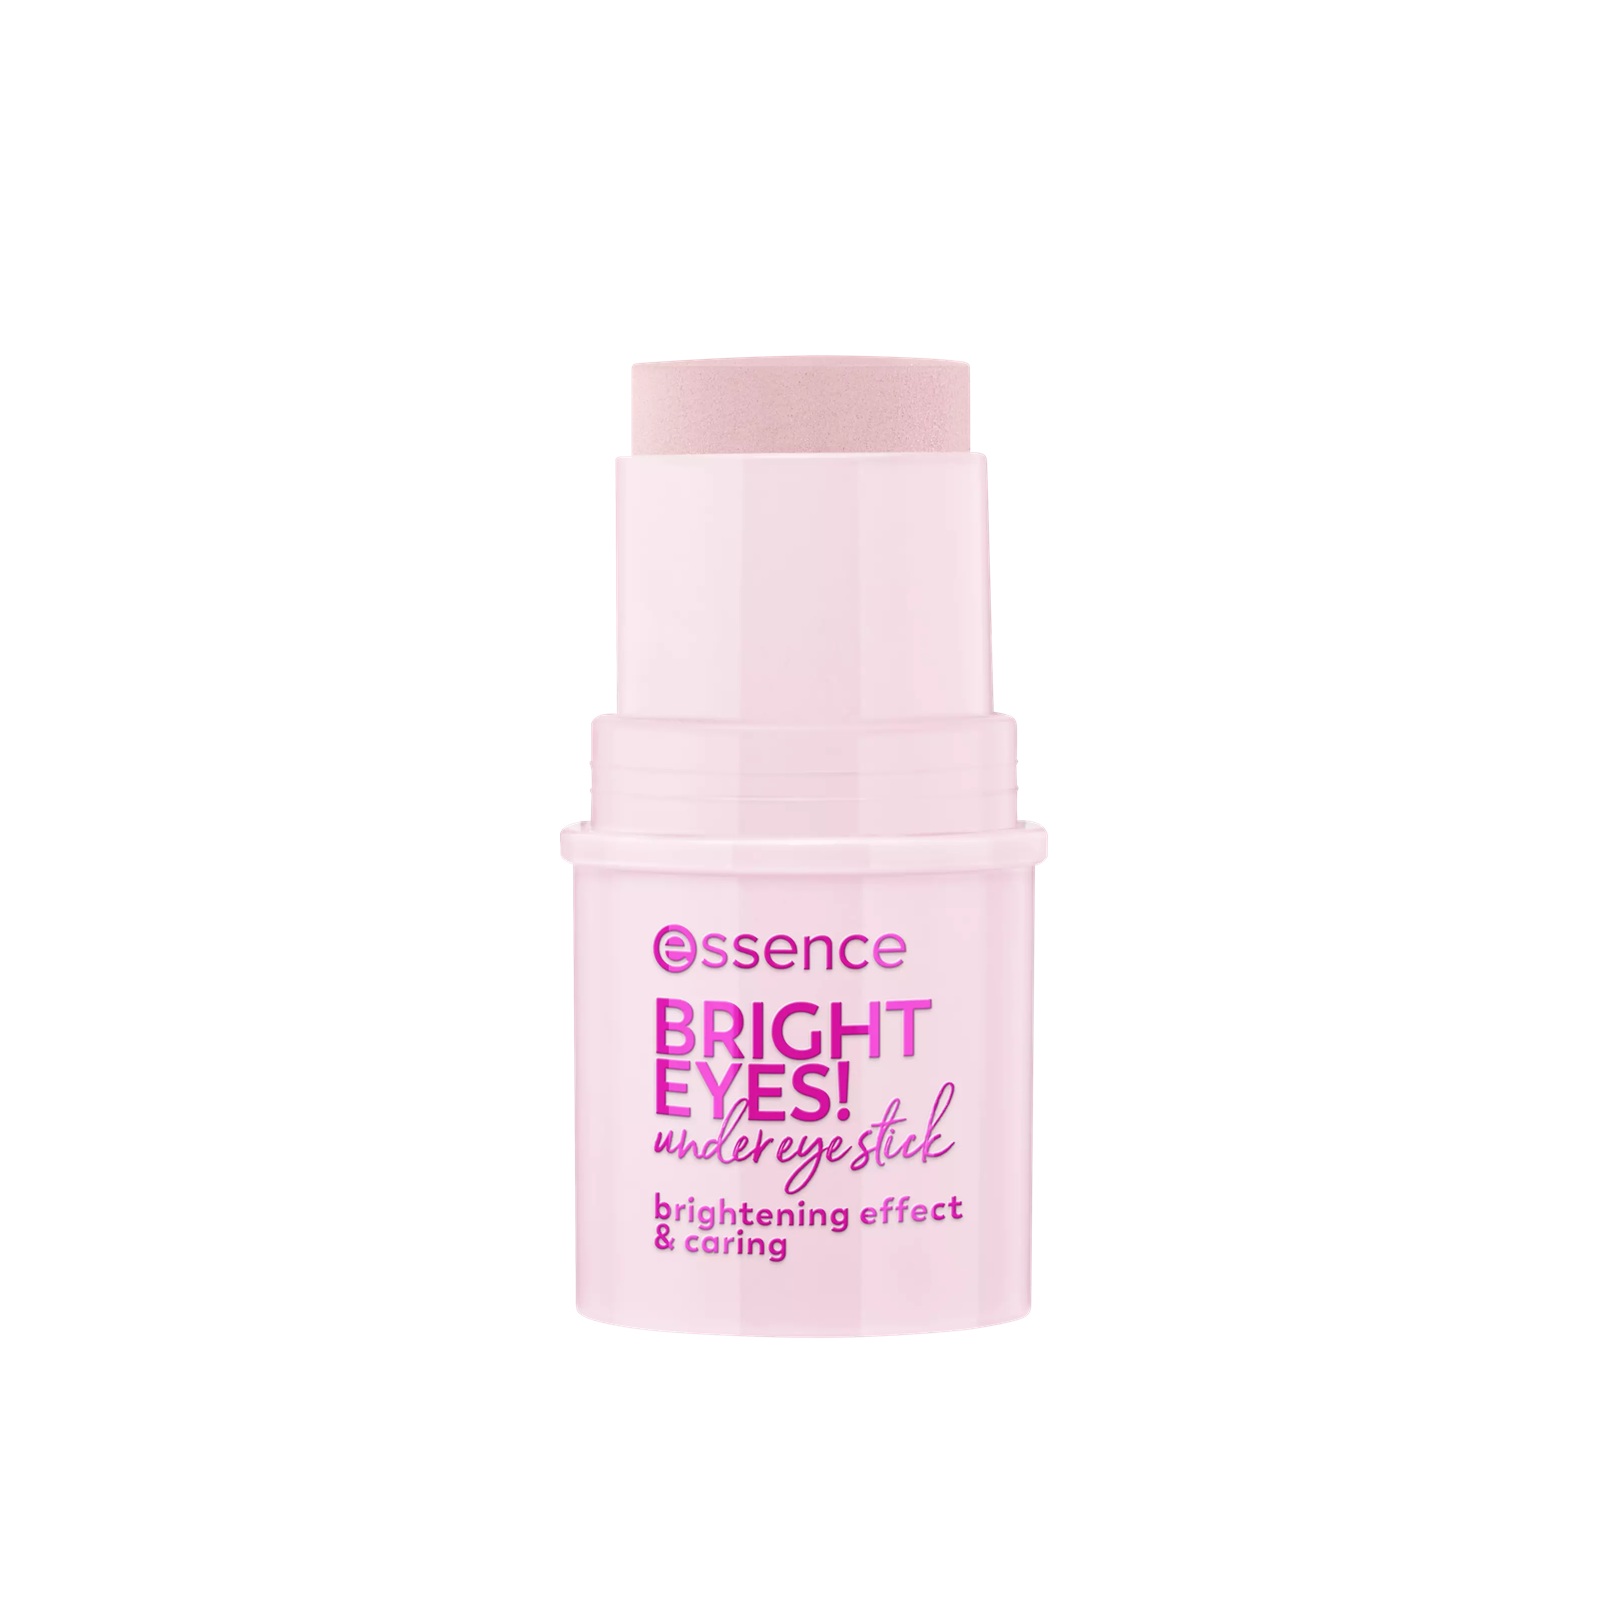 https://static.beautytocare.com/media/catalog/product/e/s/essence-bright-eyes-under-eye-stick-brightening-effect-caring-01-soft-rose-5-5g.png